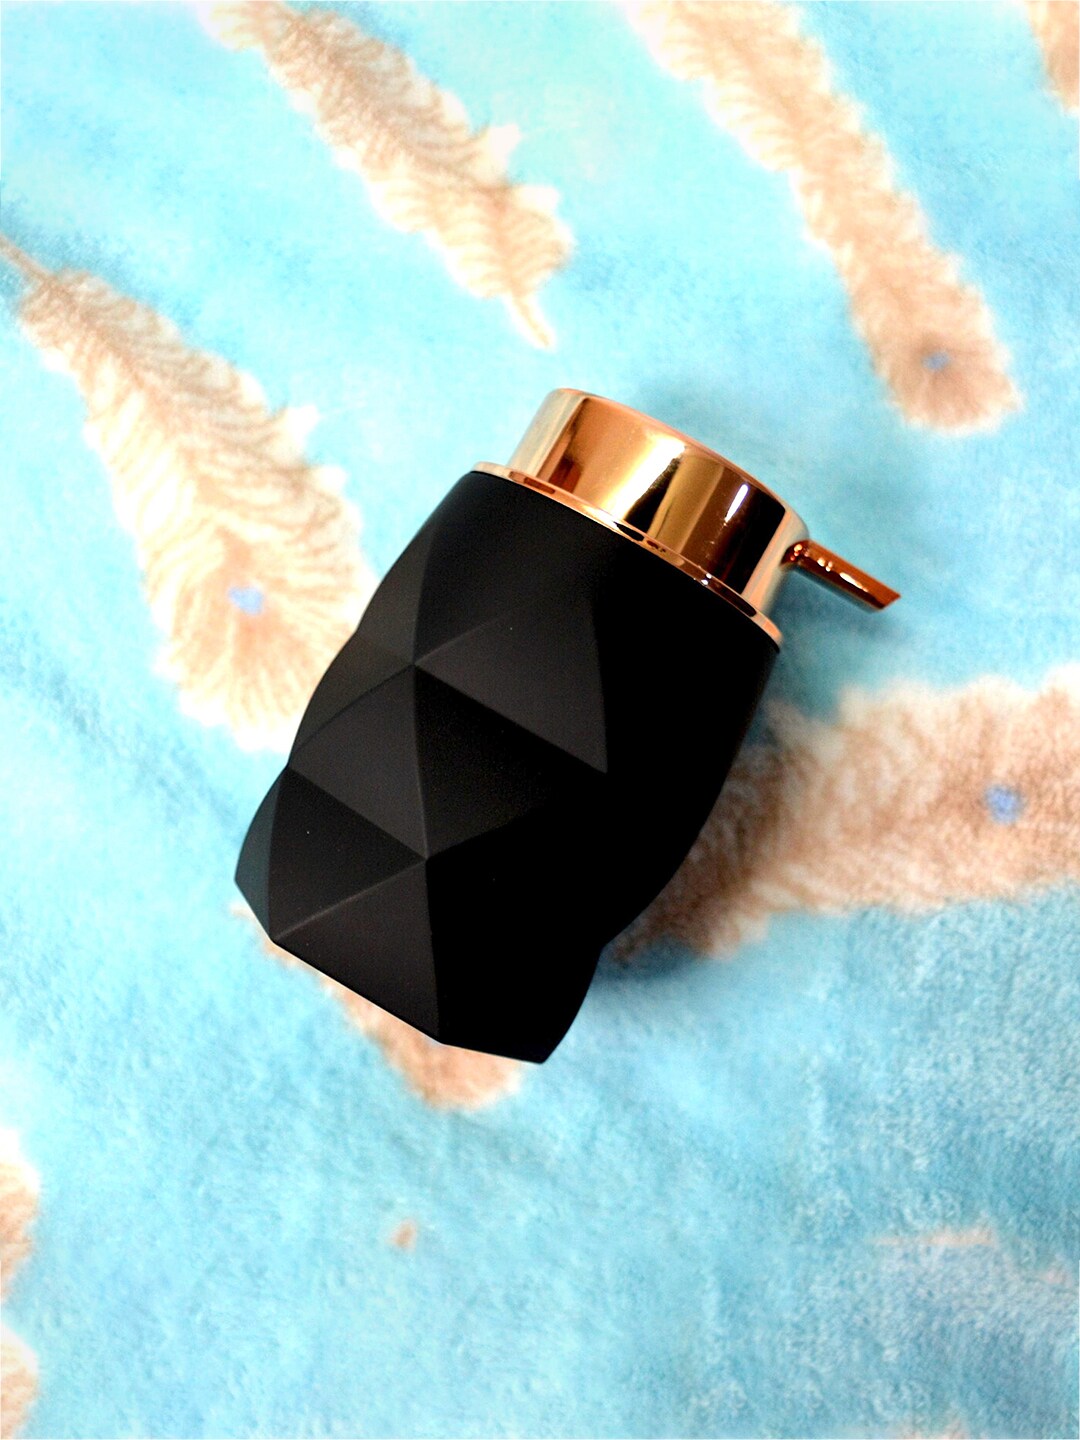 Tranquil square Black And Bronze-Colored Matte Finish Pentagon Shaped Soap Dispenser Price in India